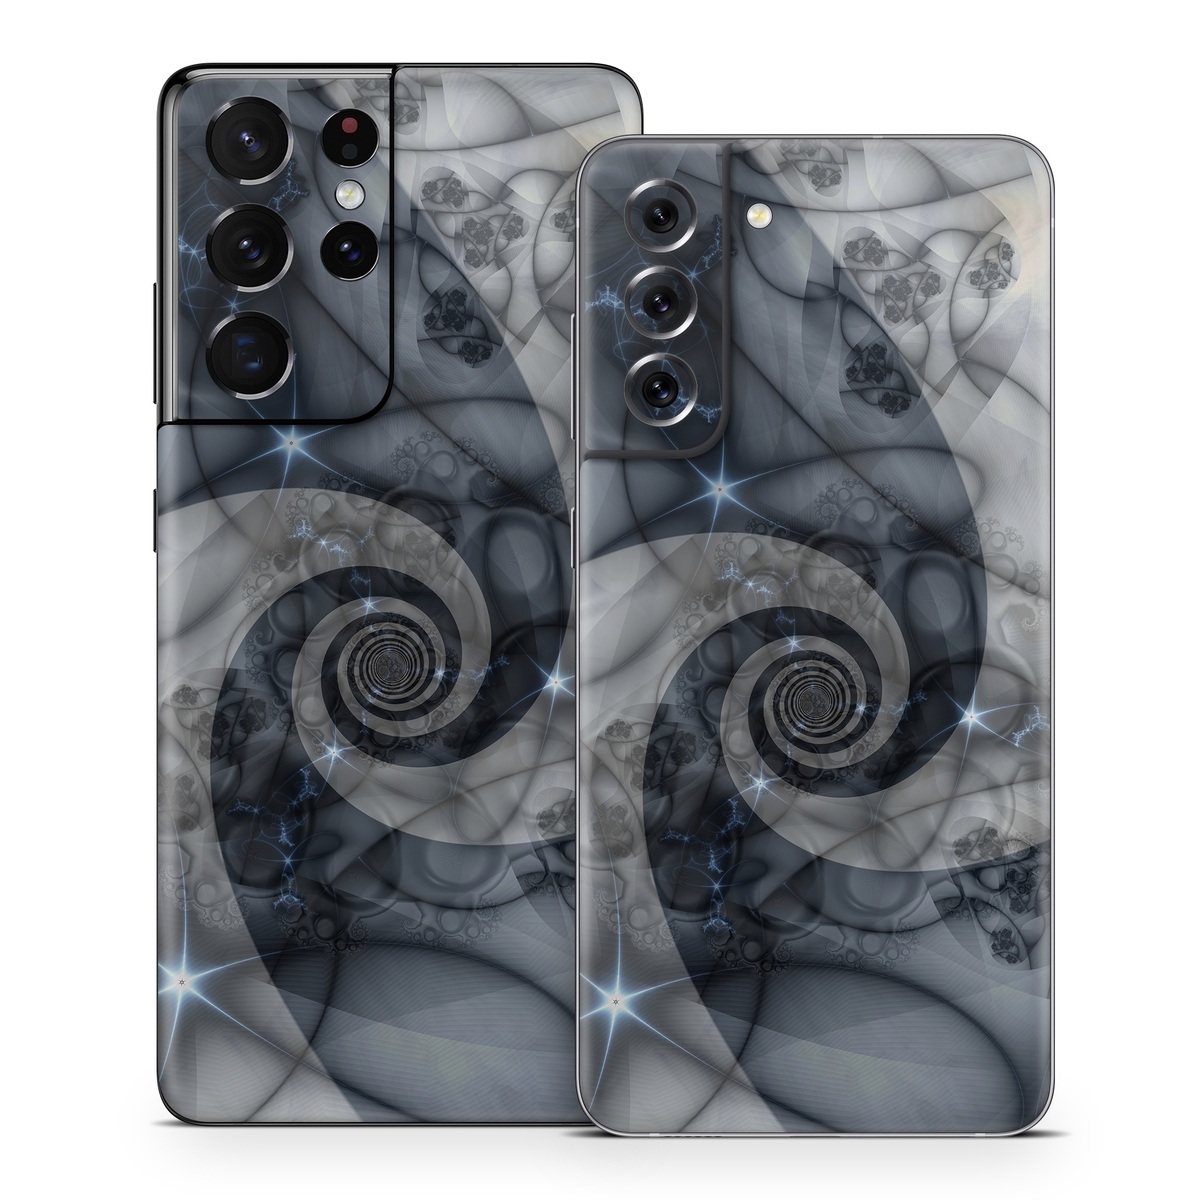 Samsung Galaxy S21 Series Skin design of Eye, Drawing, Black-and-white, Design, Pattern, Art, Tattoo, Illustration, Fractal art, with black, gray colors